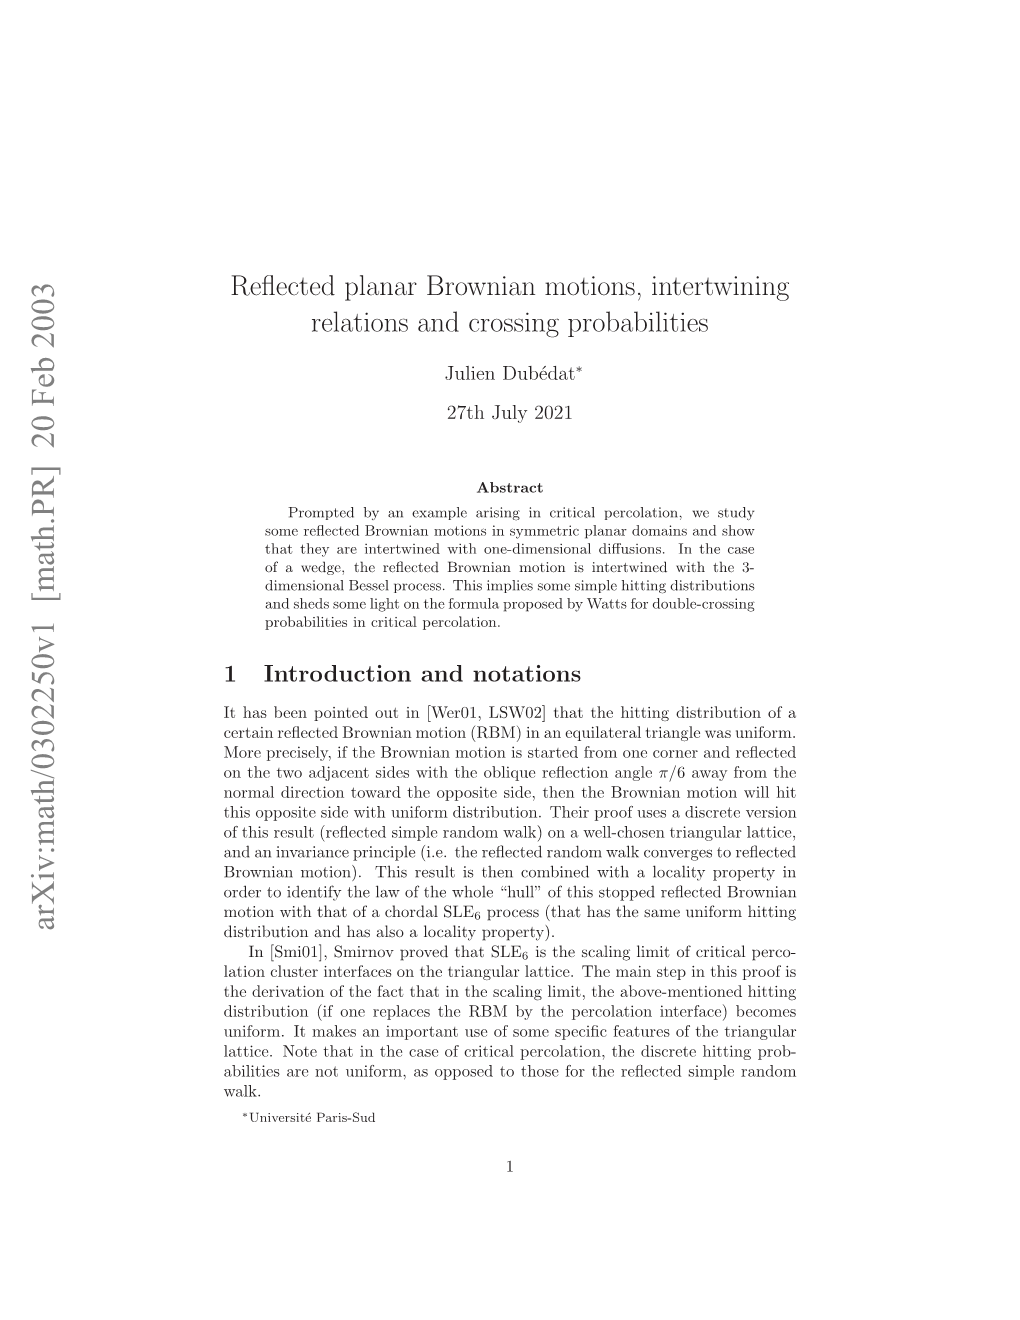 Reflected Planar Brownian Motions, Intertwining Relations and Crossing